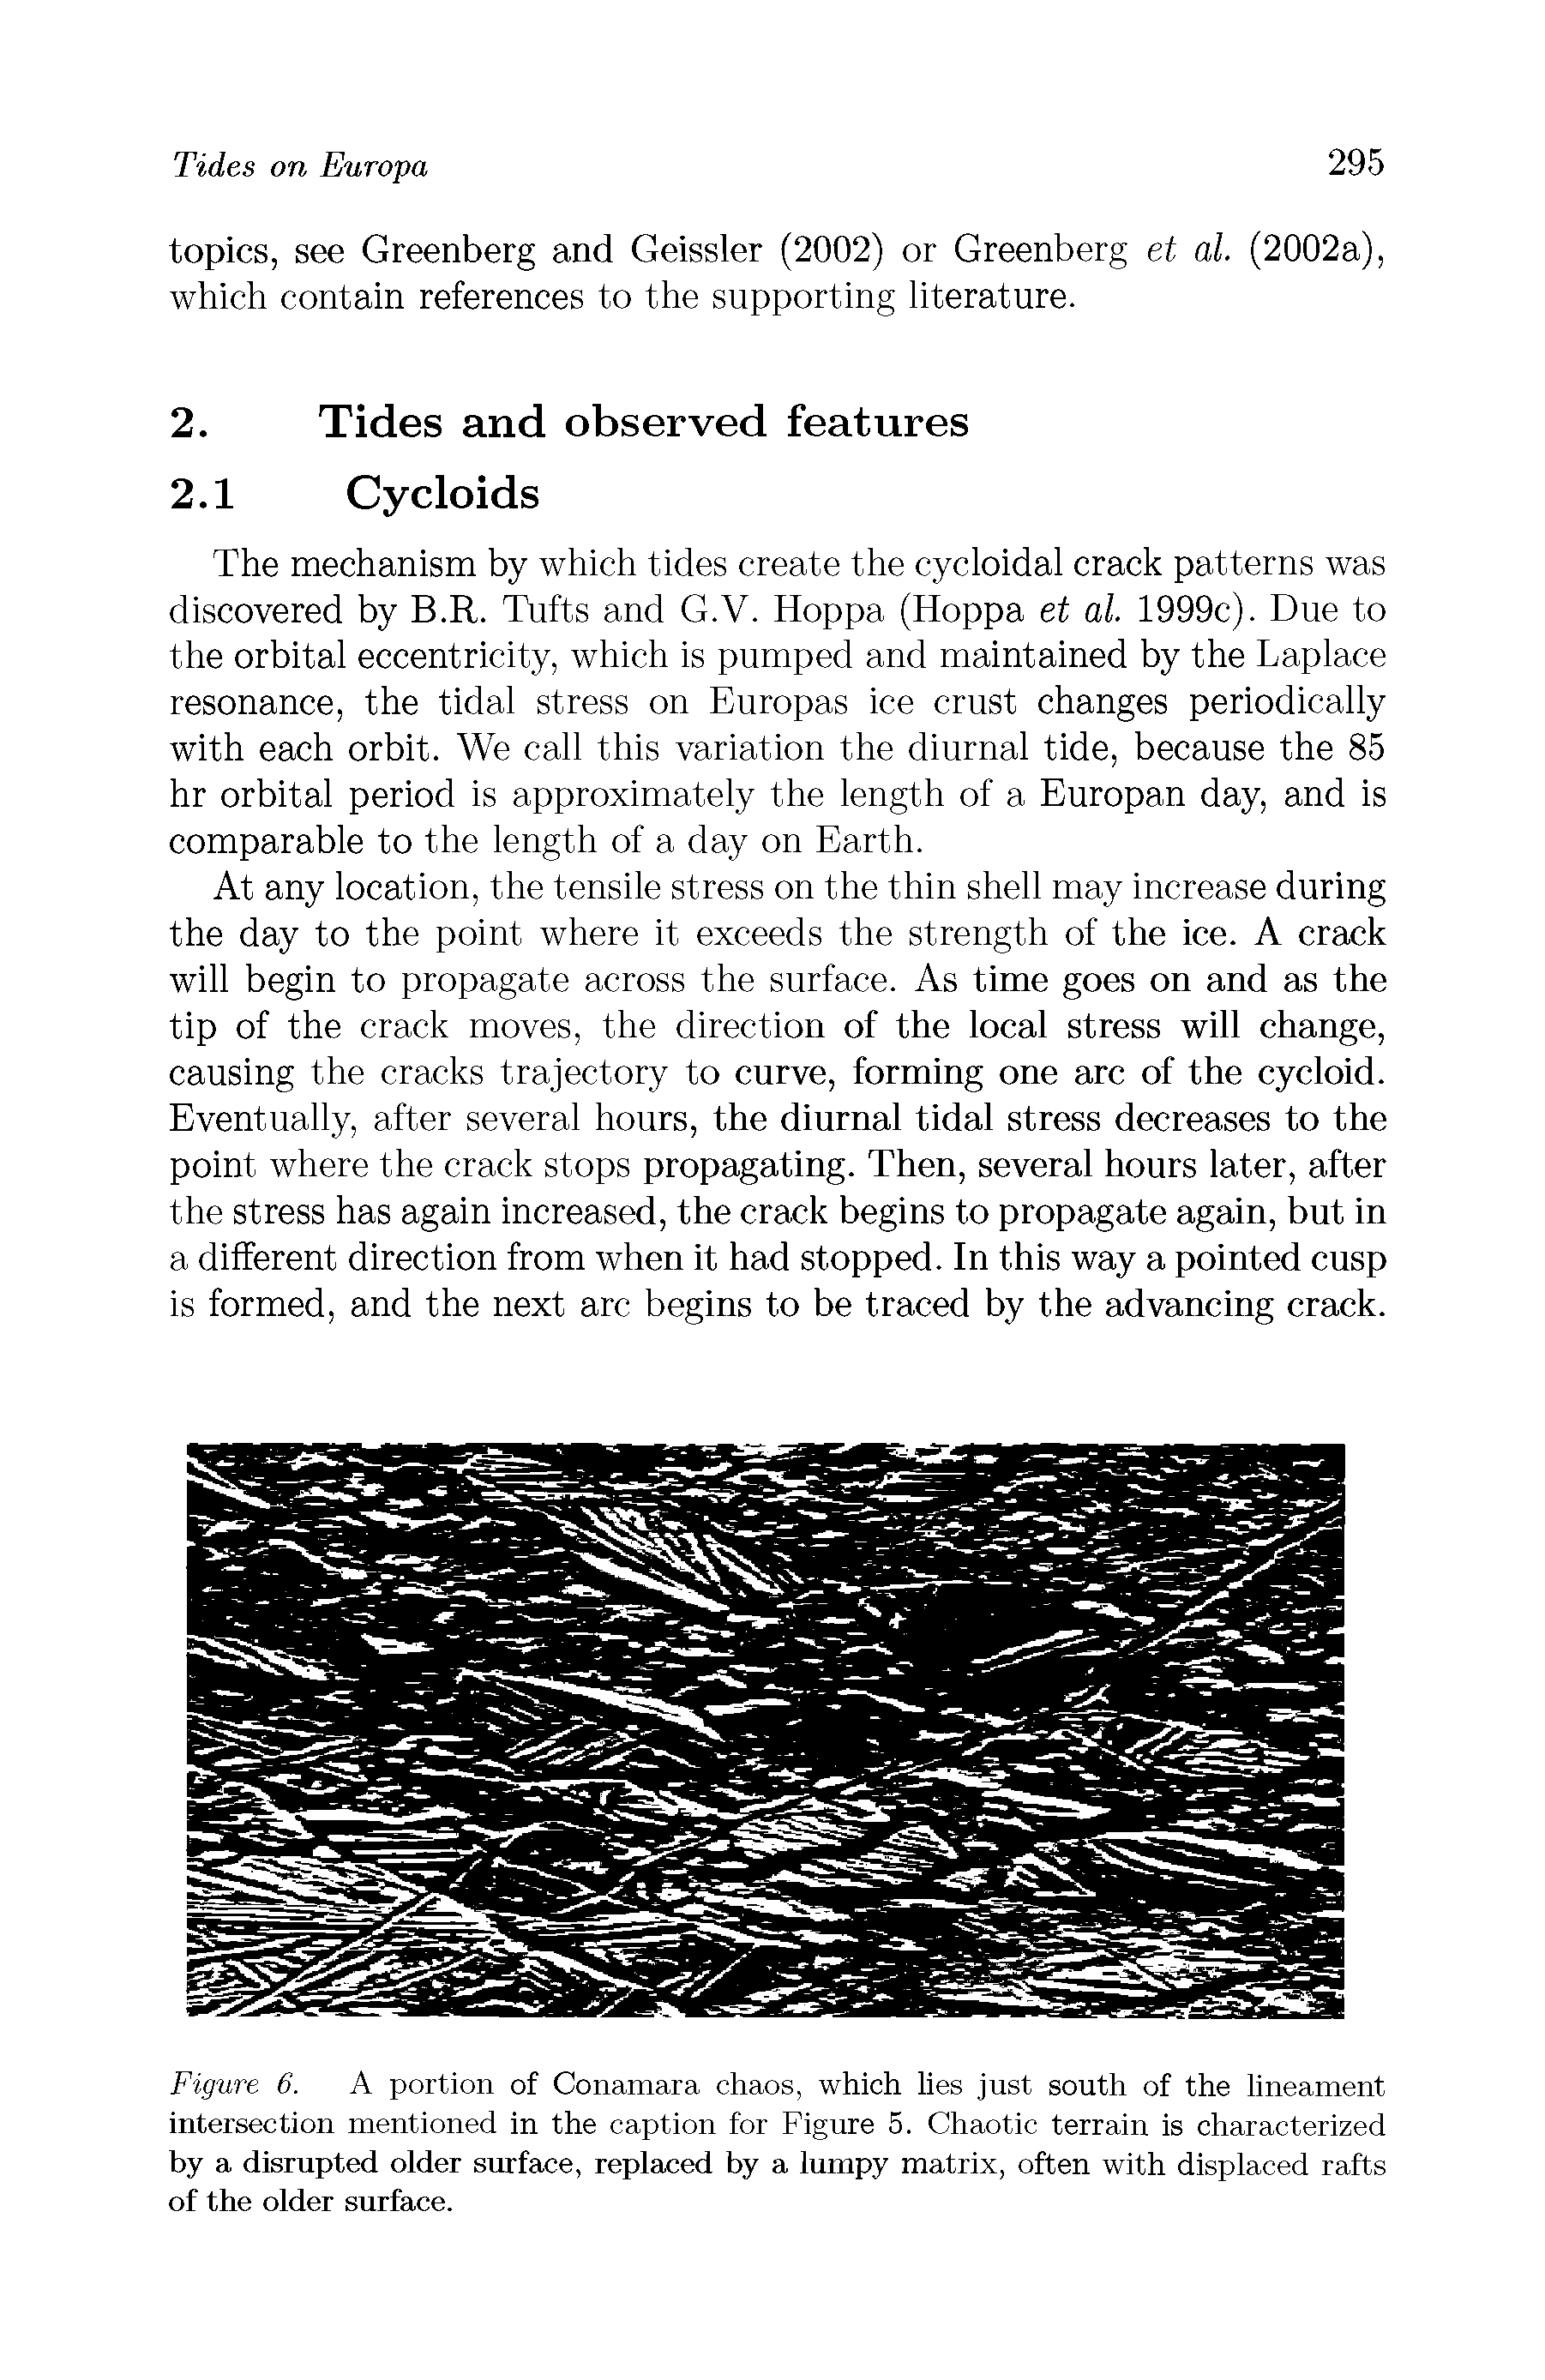 Figure 6. A portion of Conamara chaos, which lies just south of the lineament intersection mentioned in the caption for Figure 5. Chaotic terrain is characterized by a disrupted older surface, replaced by a lumpy matrix, often with displaced rafts of the older surface.